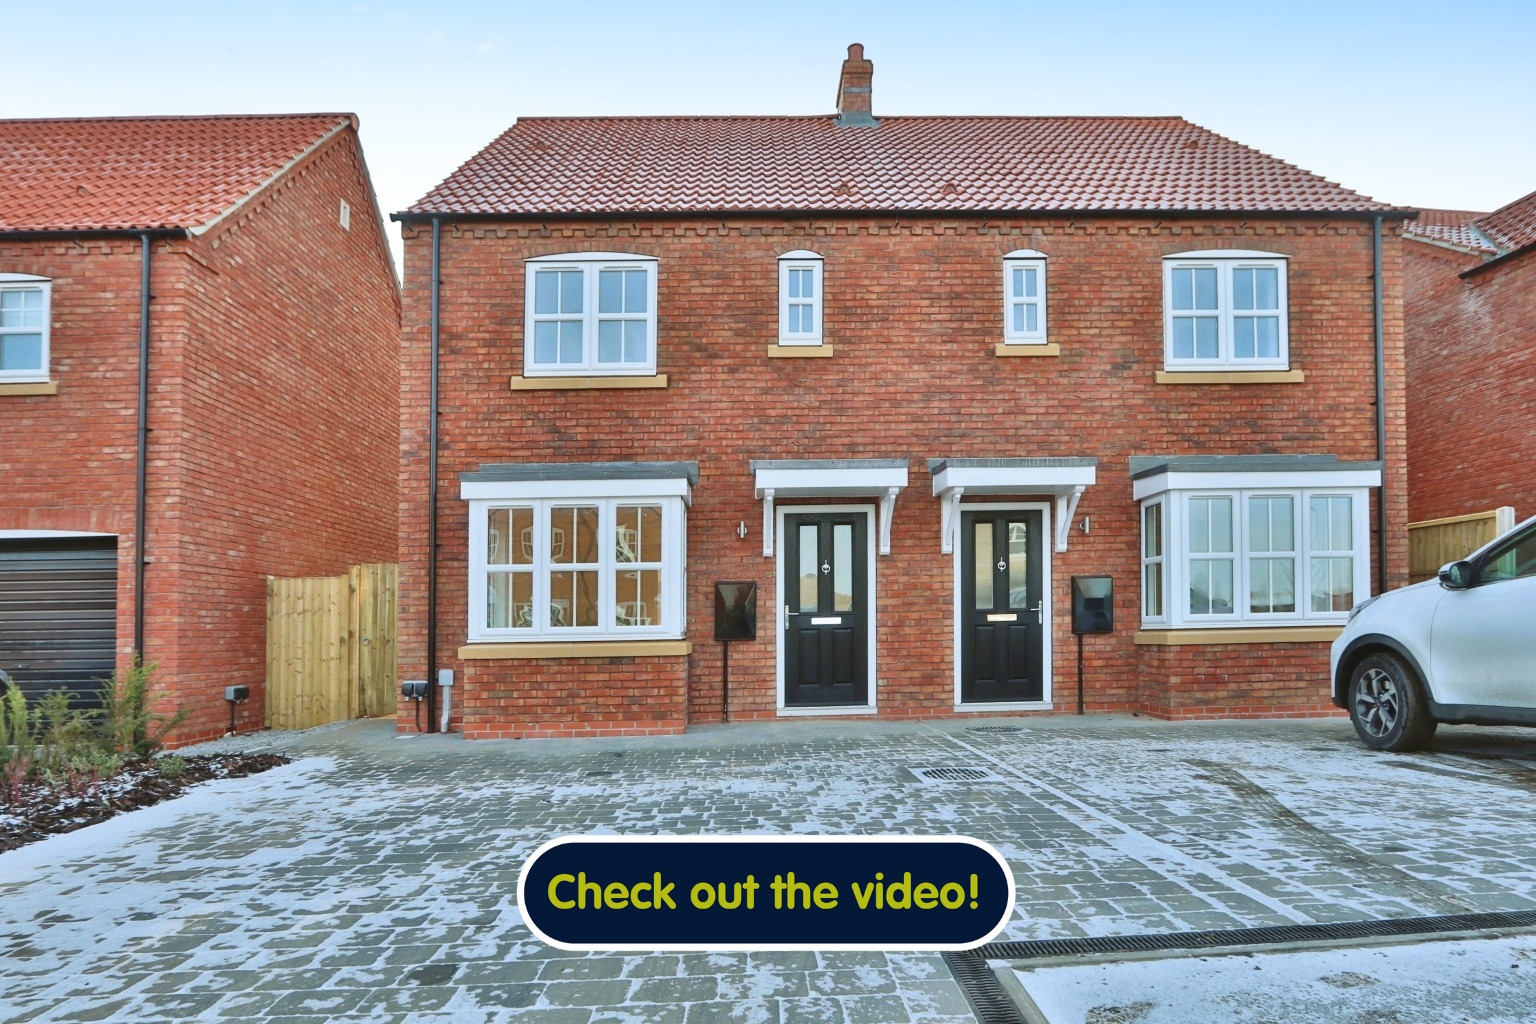 3 bed semi-detached house for sale in Hobson Close, Beverley - Property Image 1